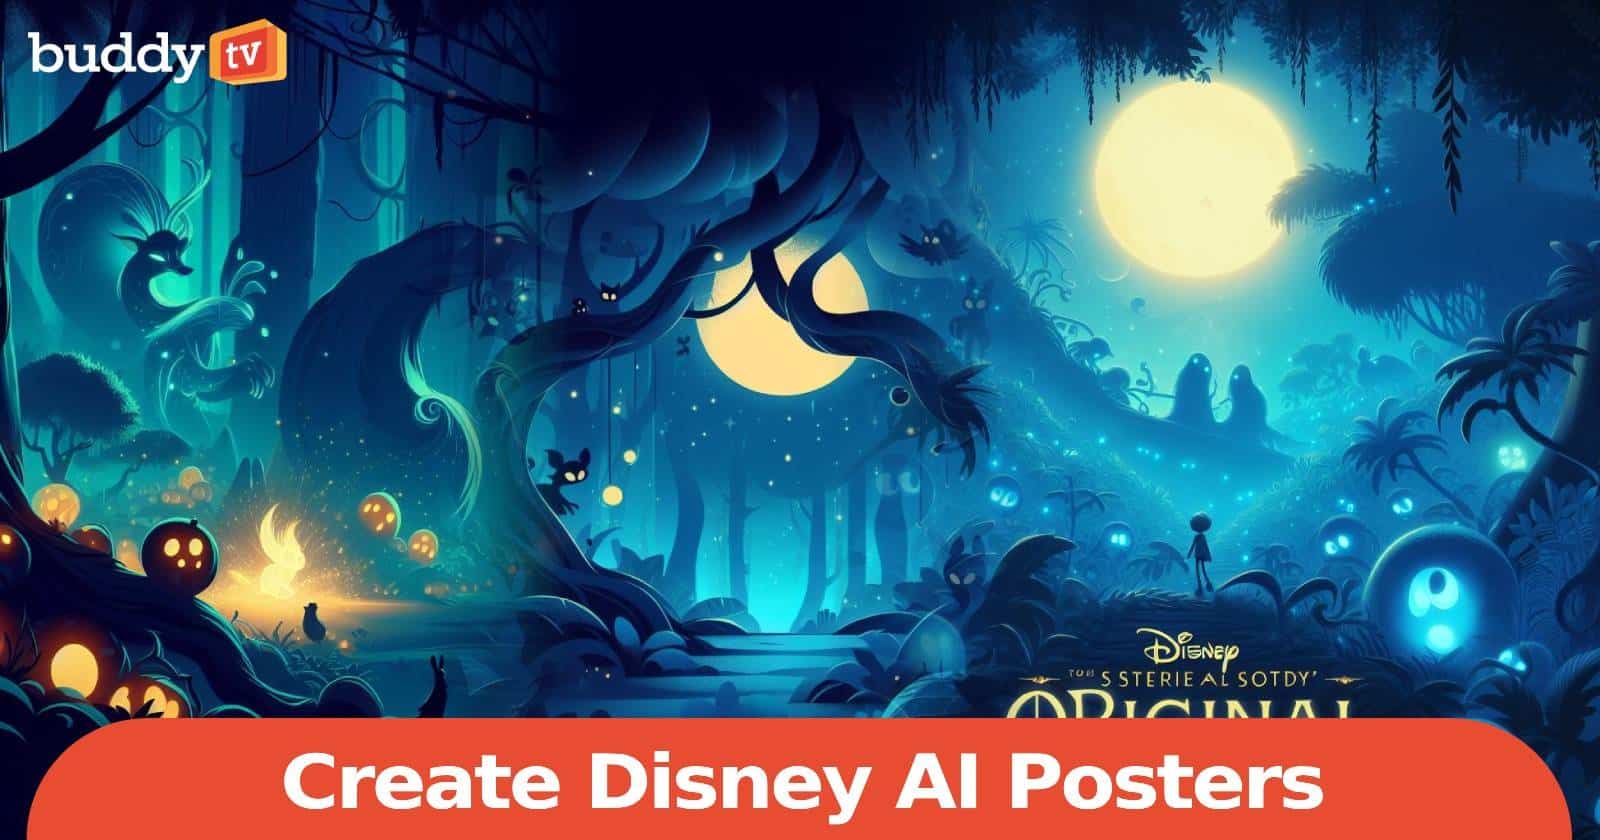 Harnessing Magic: Crafting Disney-Inspired Posters with AI